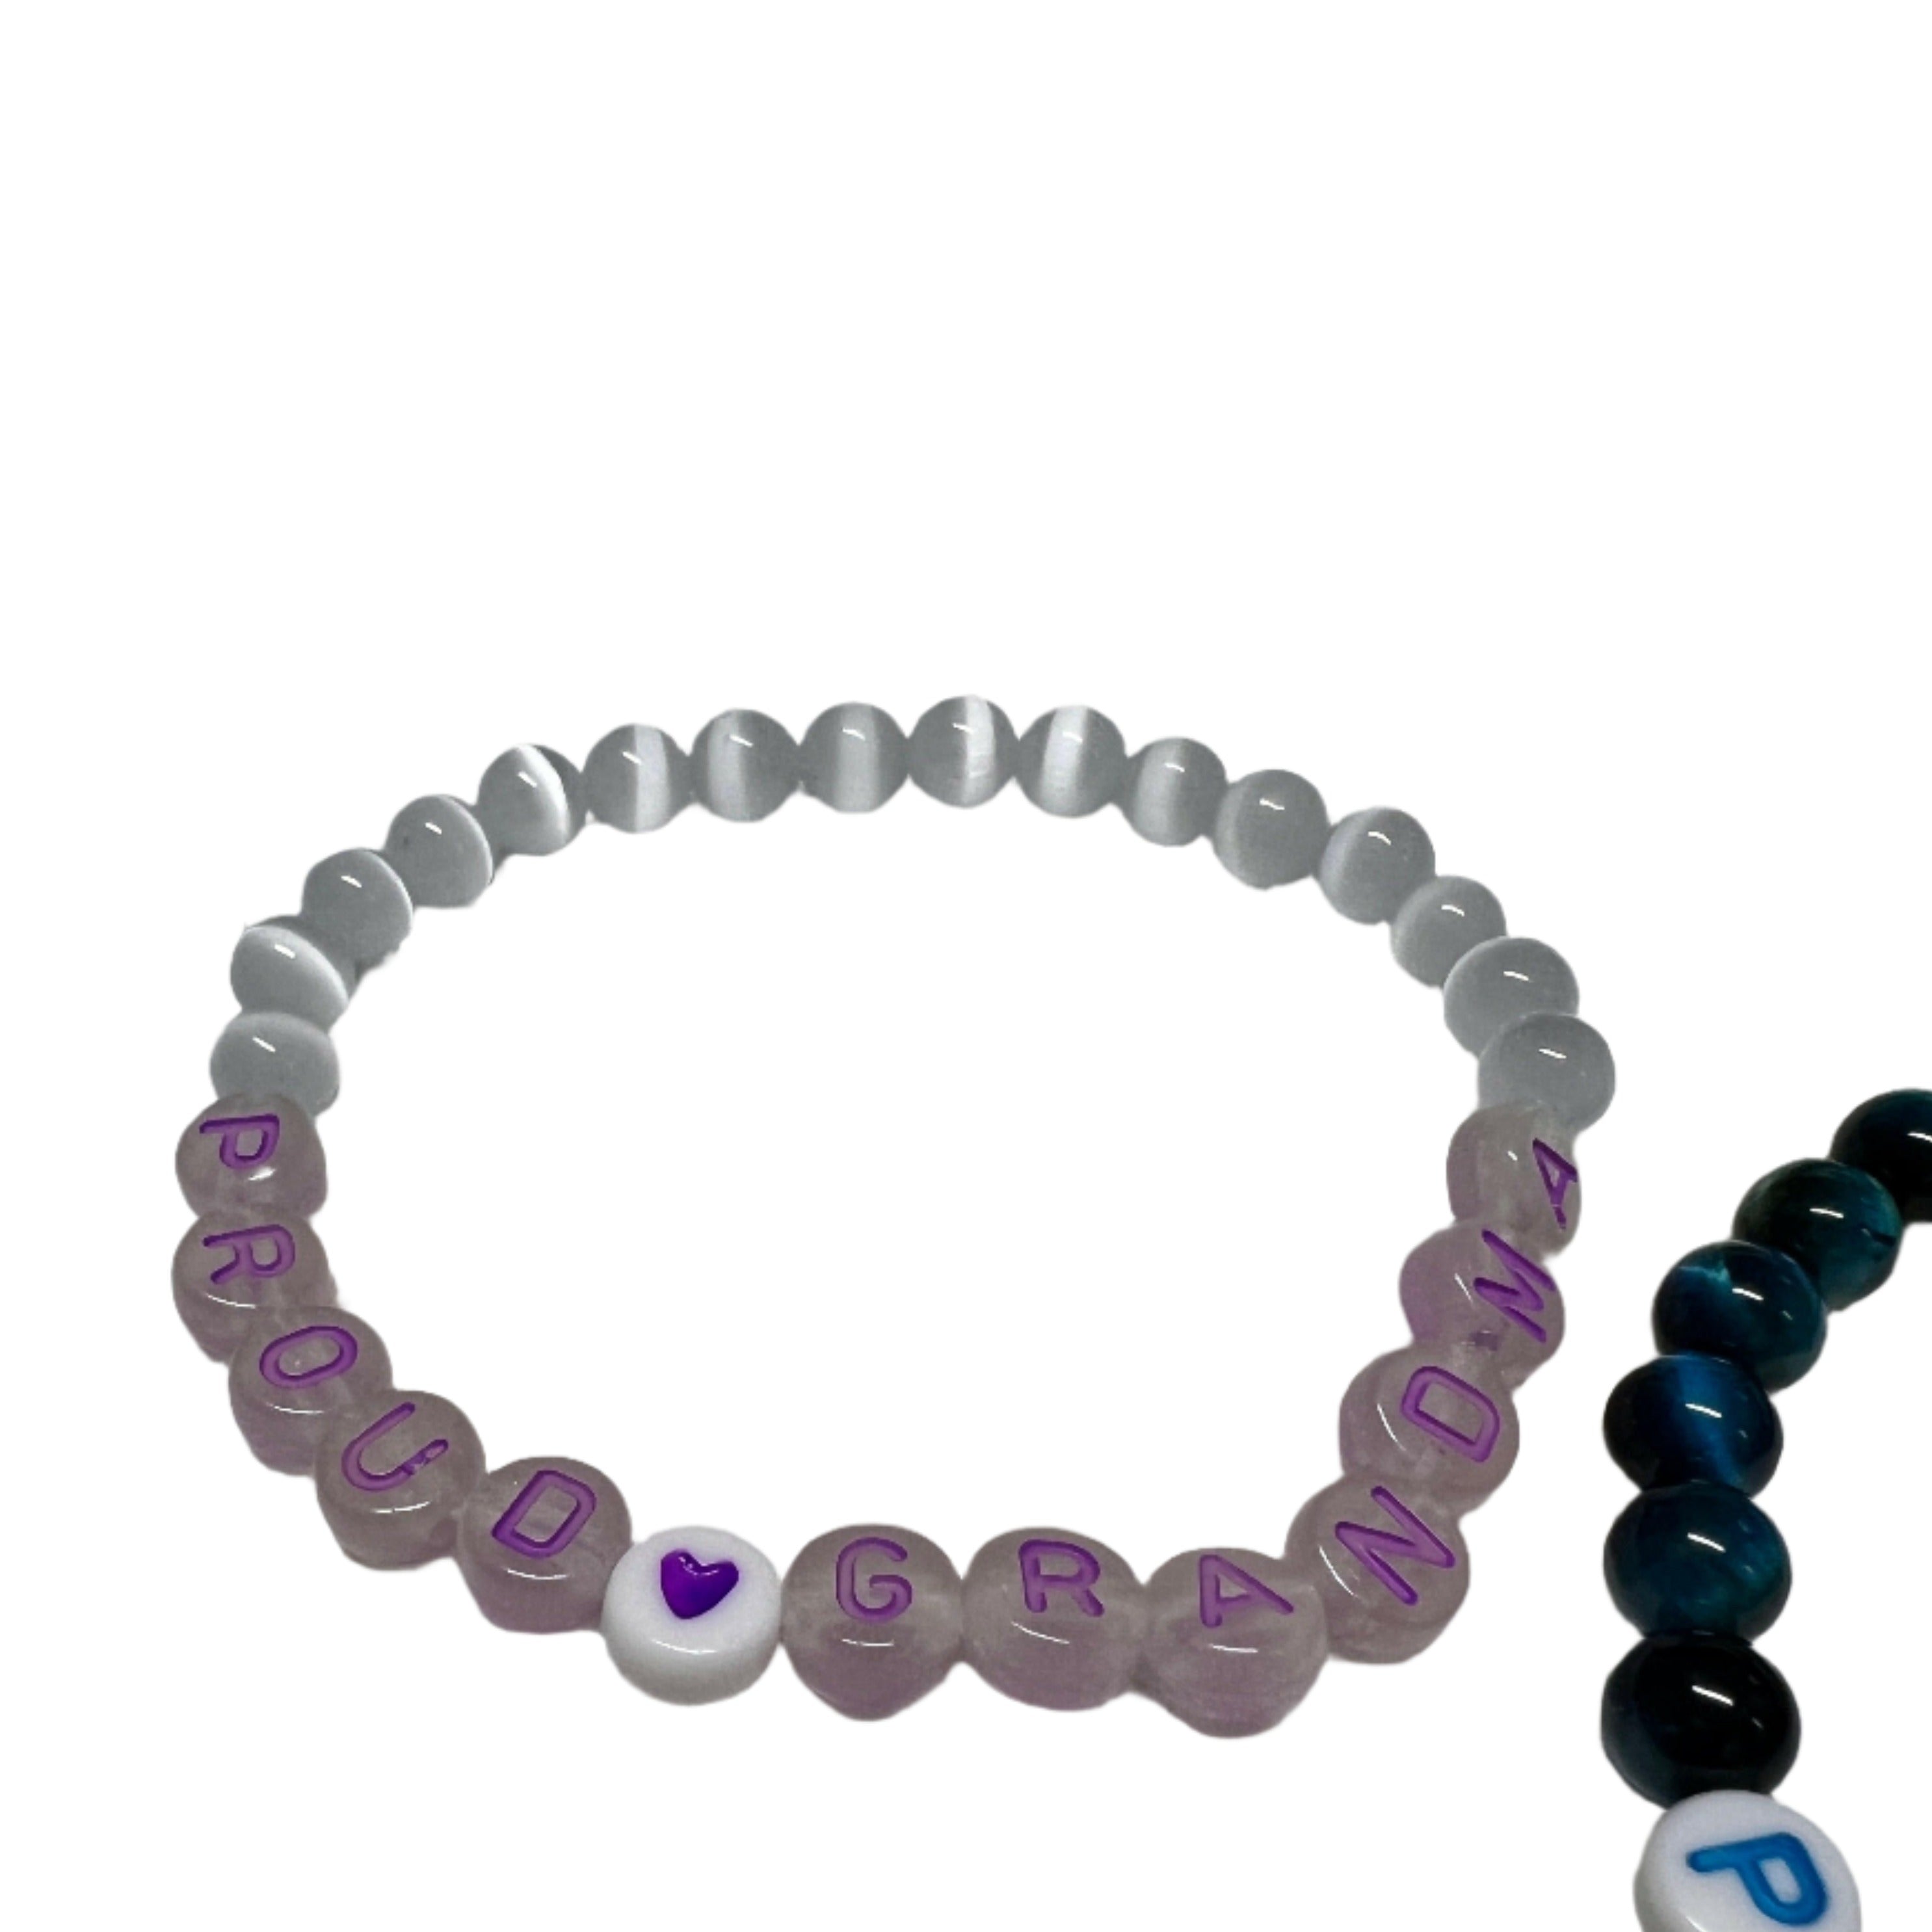 Elegant Mother's Day Bracelet - Ideal for gifting, featuring timeless design